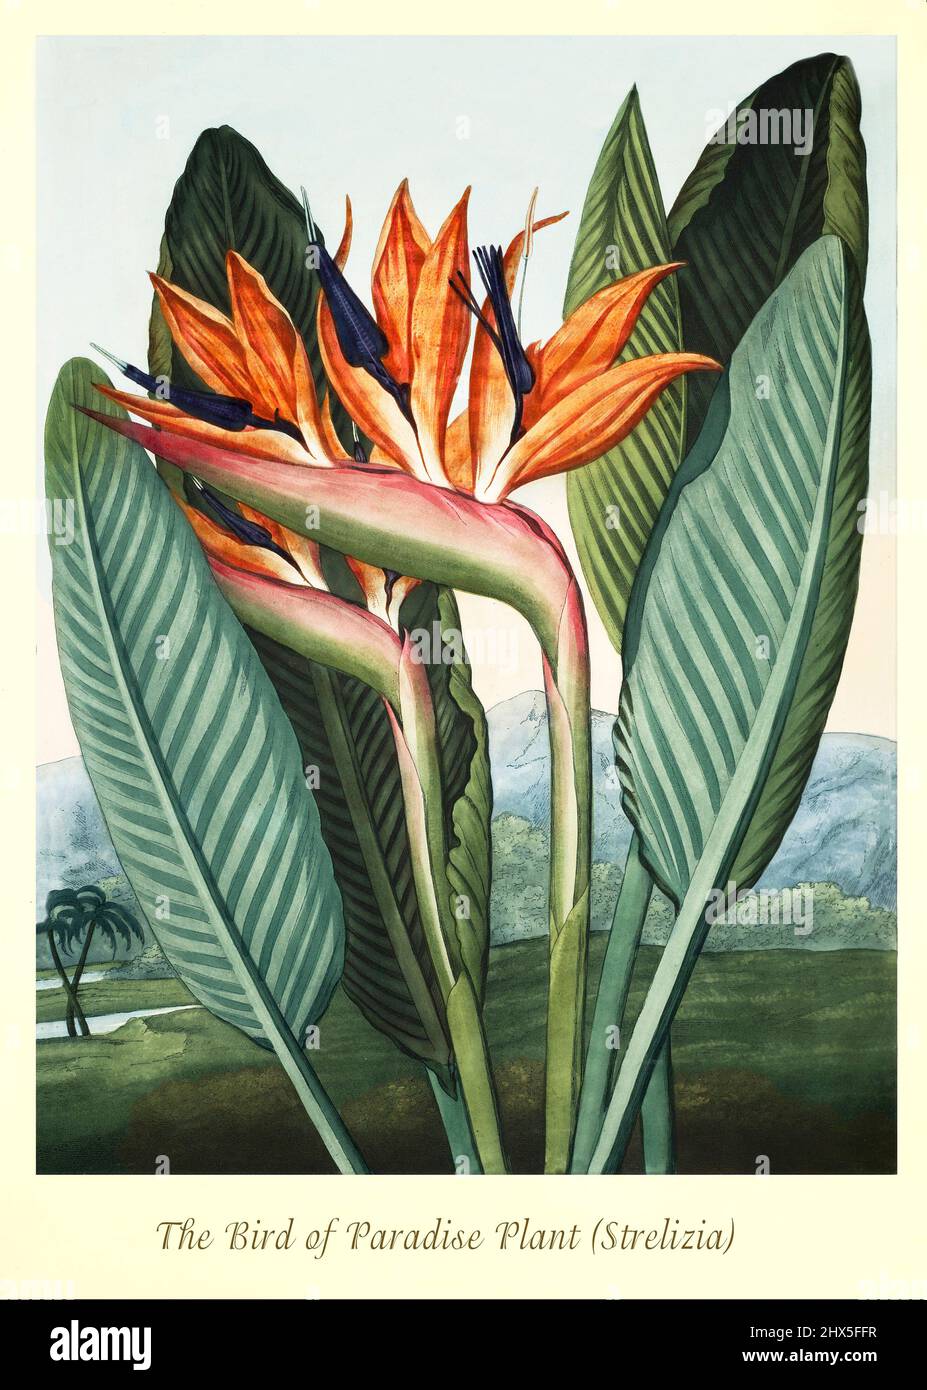 An early 19th century illustration of the Bird of Paradise plant (Strelitzia reginae) in the Genus Strelitzia and Family Strelitziaceae.  Closely related to the banana plant, the bird of paradise plant is named for closely resembling the tropical bird of the same name.  This artwork for Robert John Thornton's 'The Temple of Flora' in 1807, was printed, for the publisher, by T. Bensley, London, England. Stock Photo